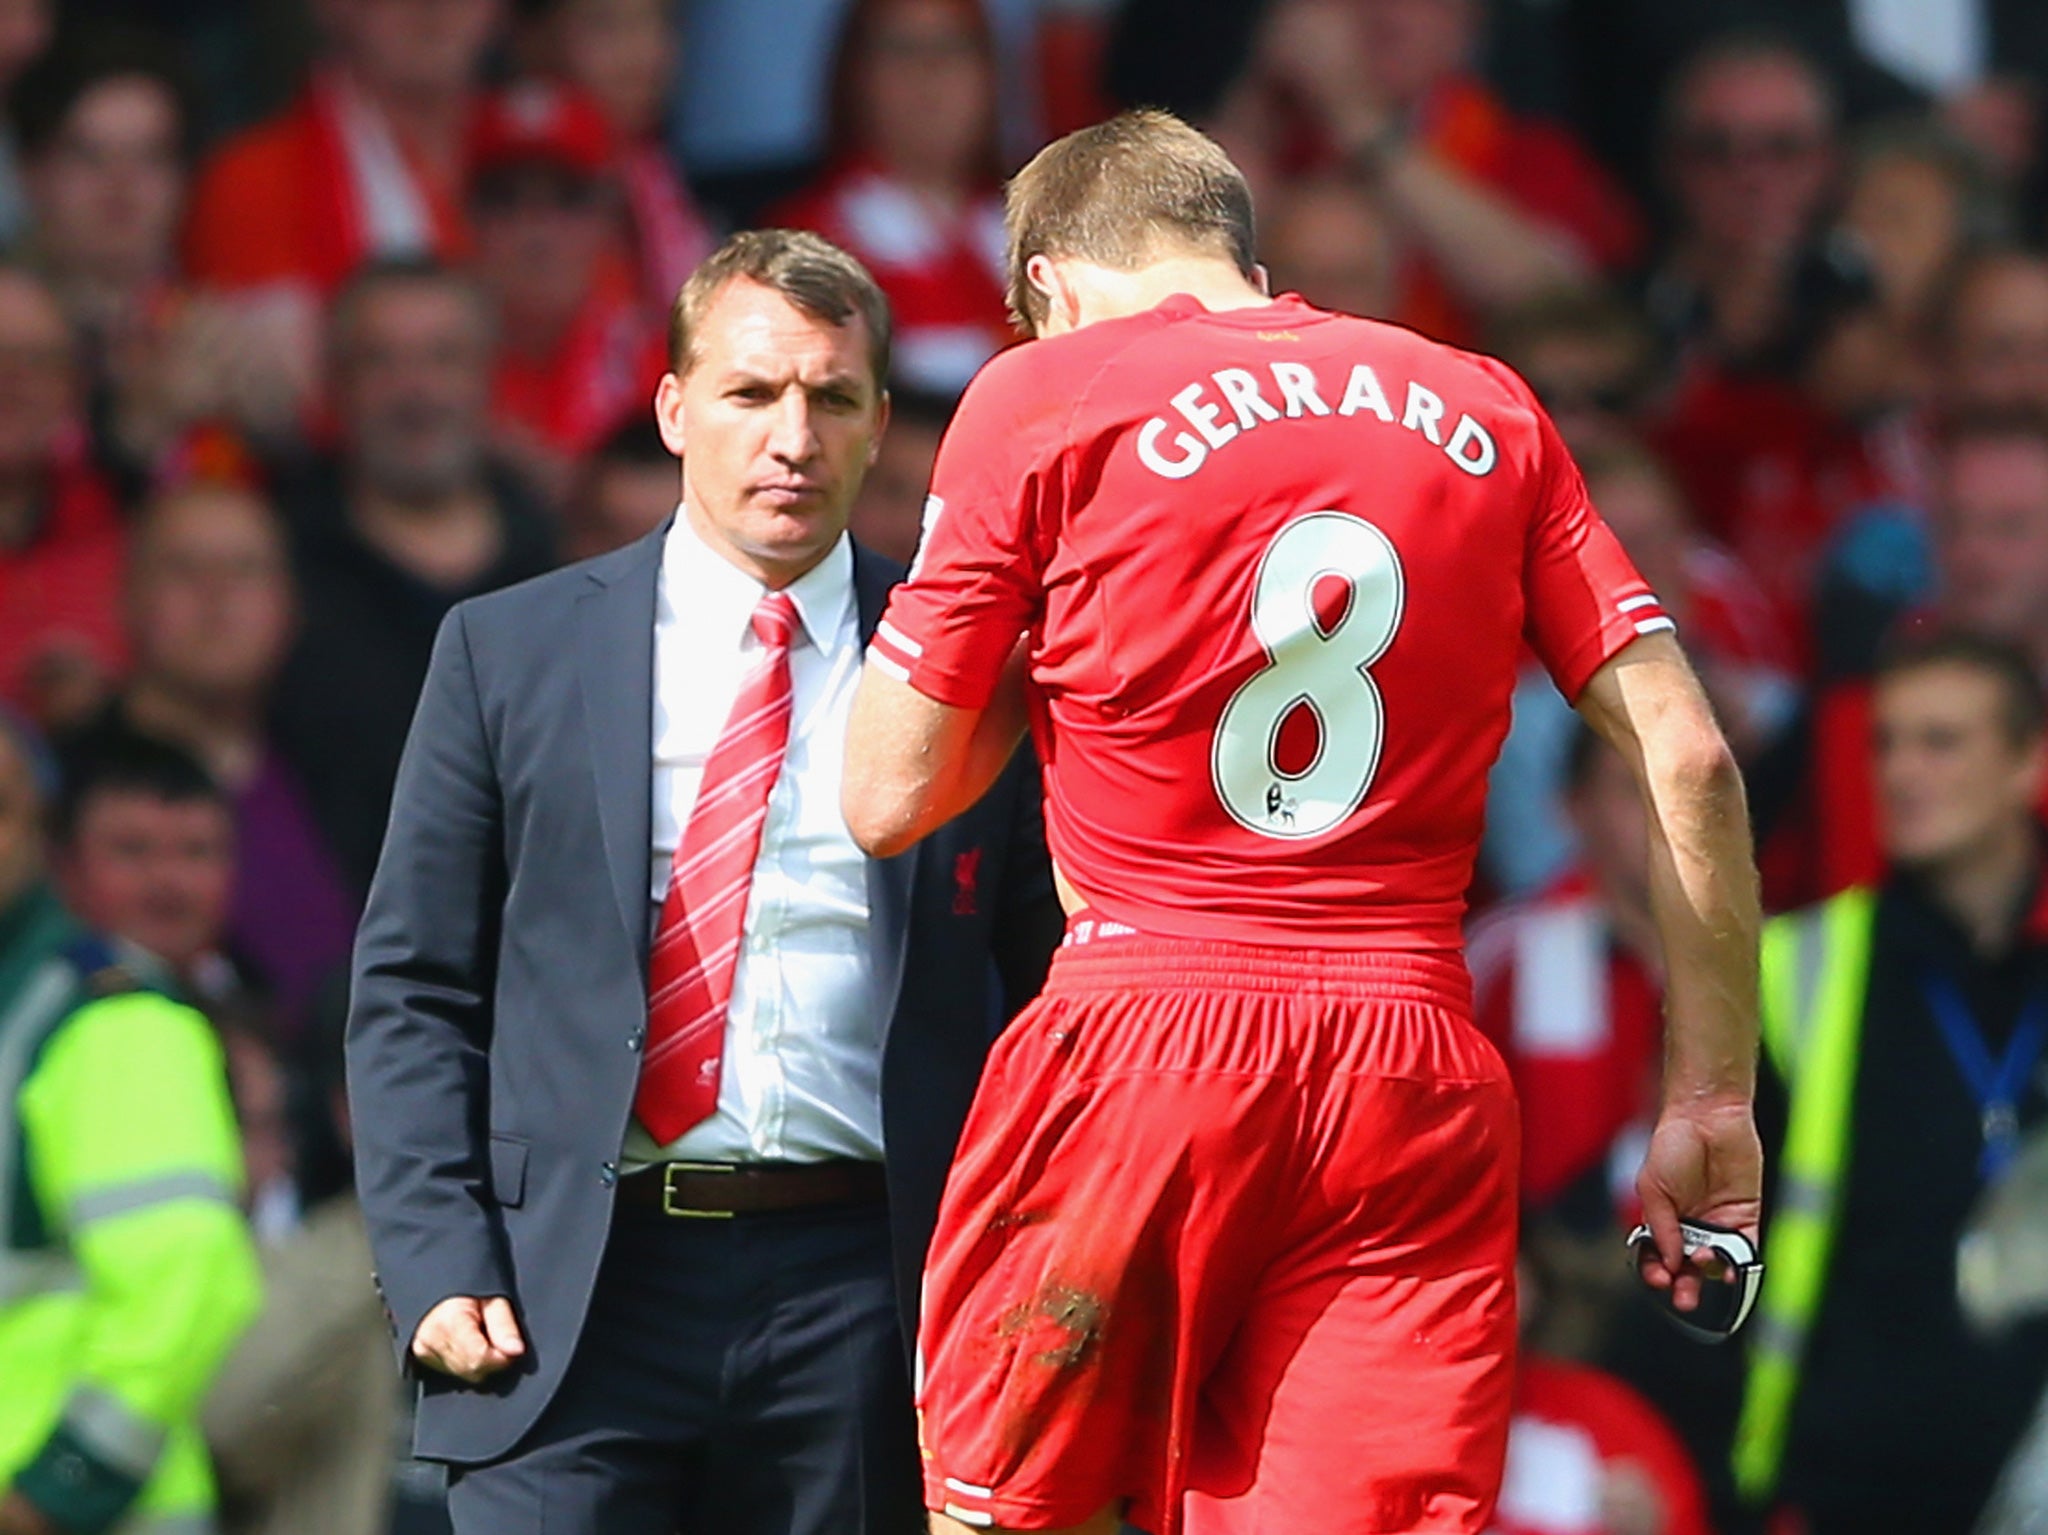 Brendan Rodgers goes to commiserate with Steven Gerrard after defeat to Chelsea in 2014